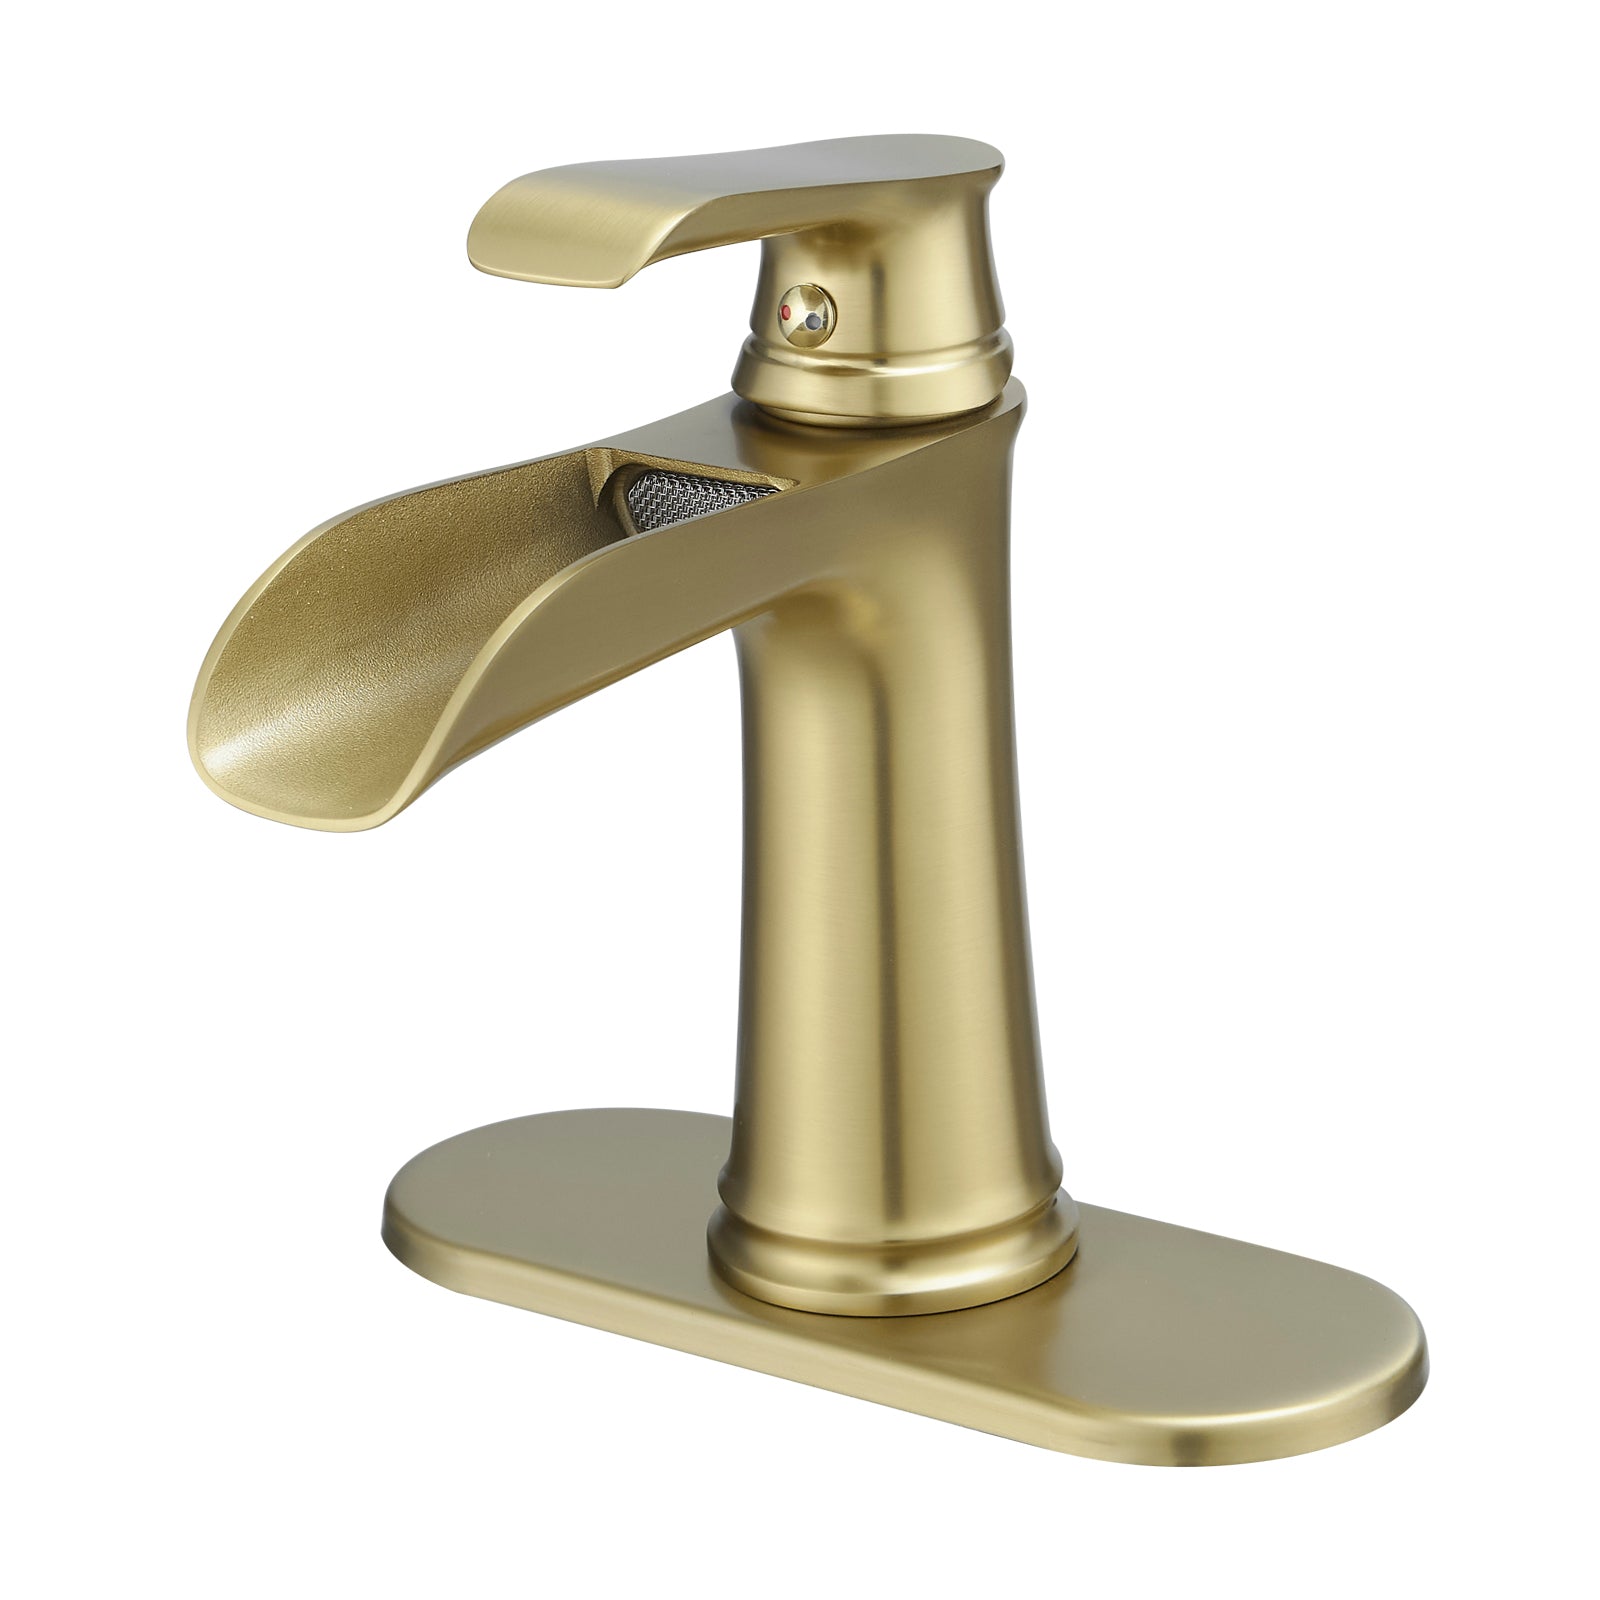 Sink Faucet With Deck Plate Waterfall Nickel Gold